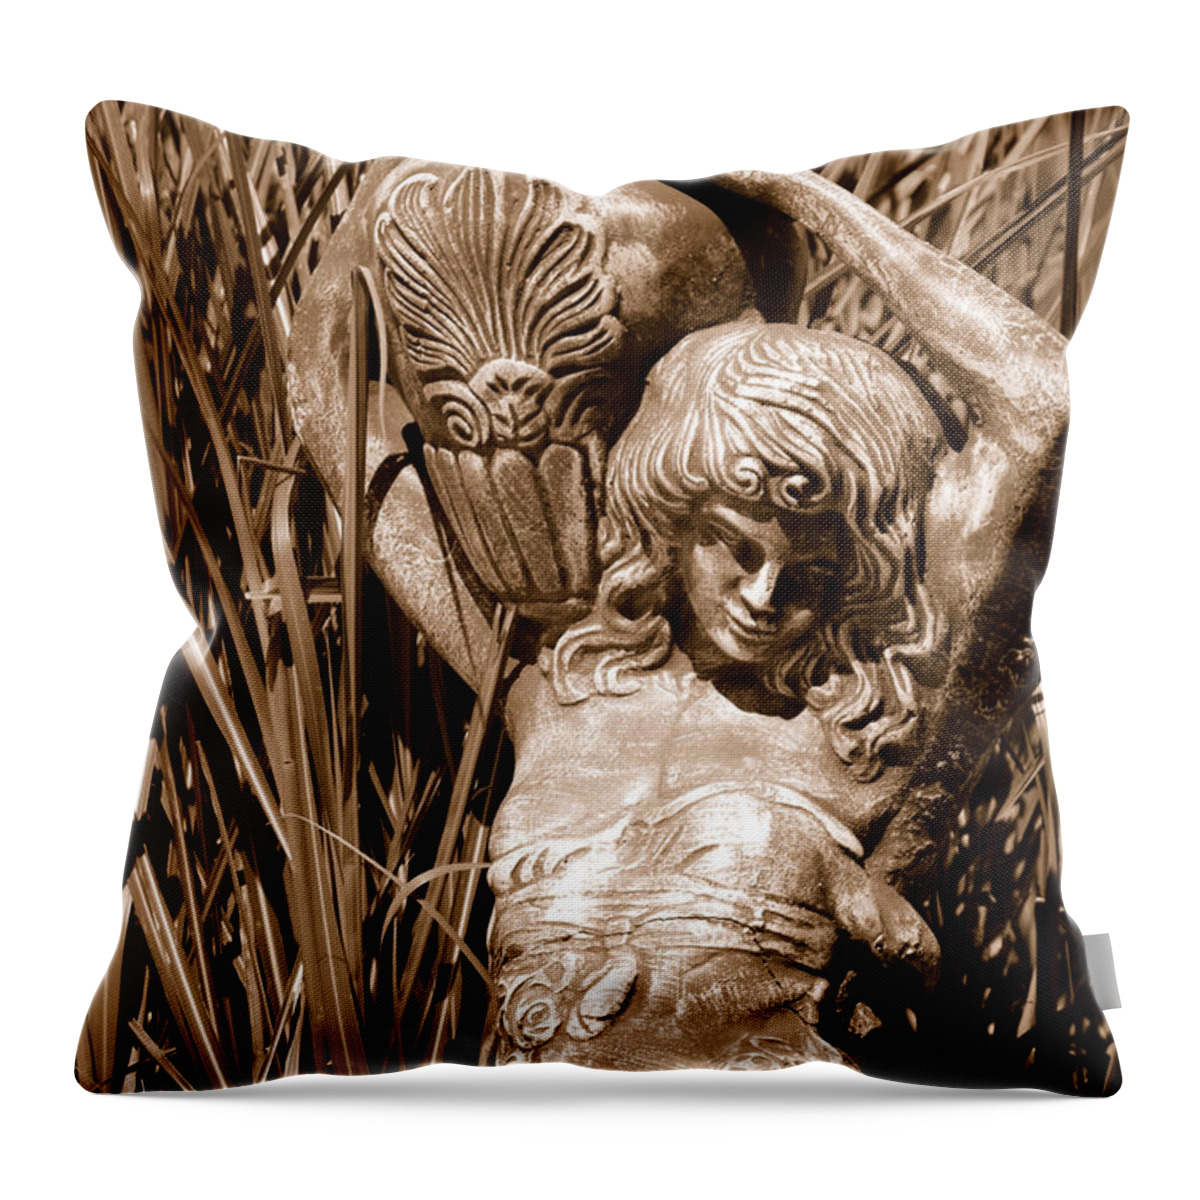 Statue Greek Goddess Water Jug Reeds Concrete Woman Throw Pillow featuring the photograph Statuesqe Reeds by Holly Blunkall